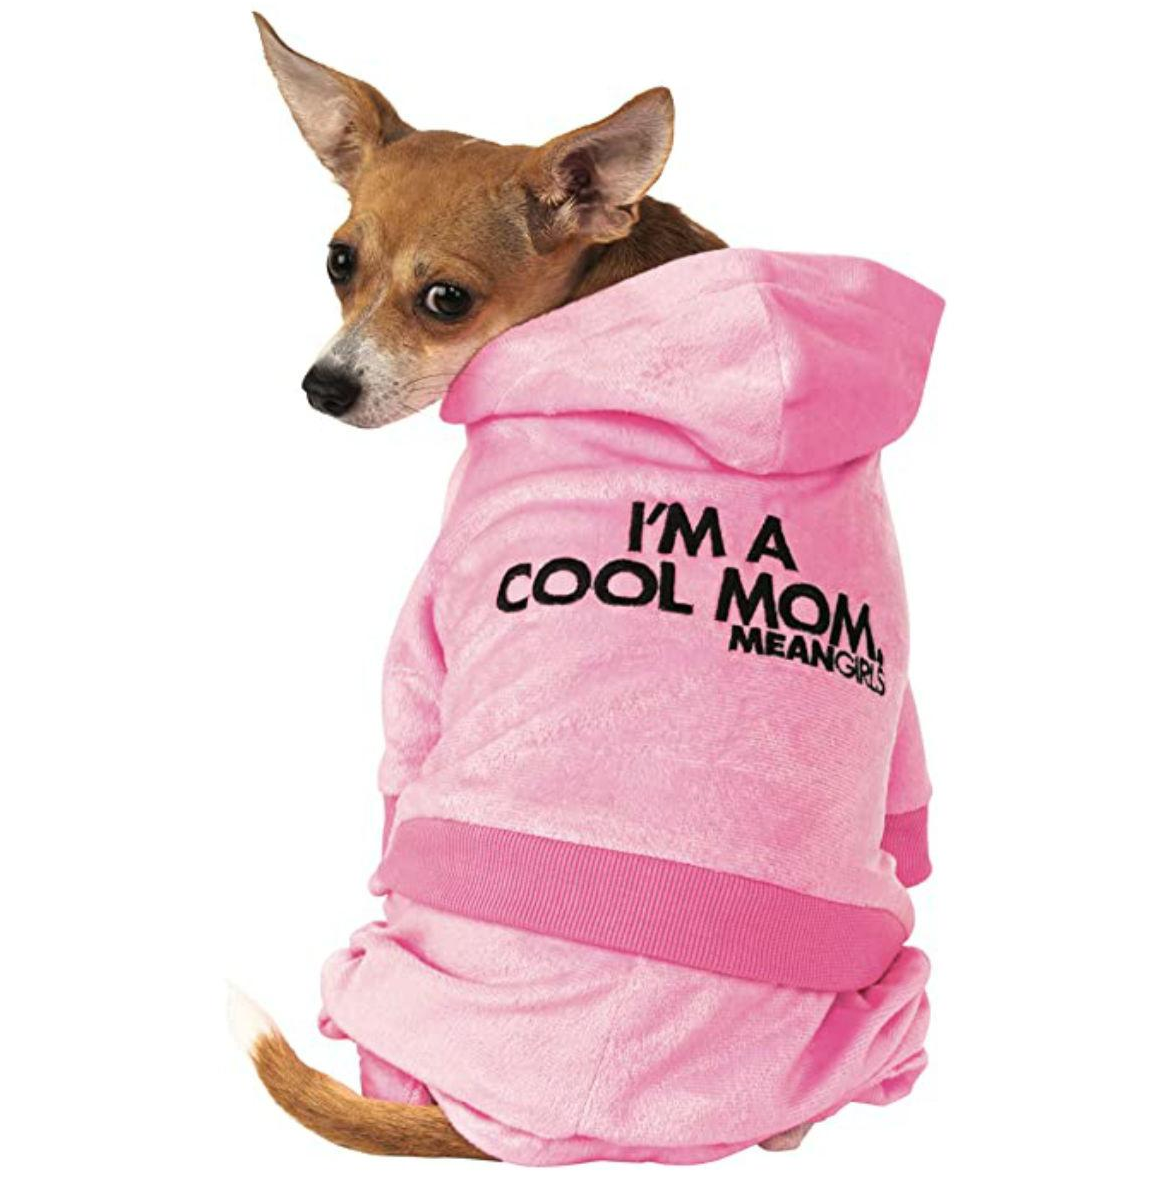 Mean Girls "I'm a cool Mom" Tracksuit